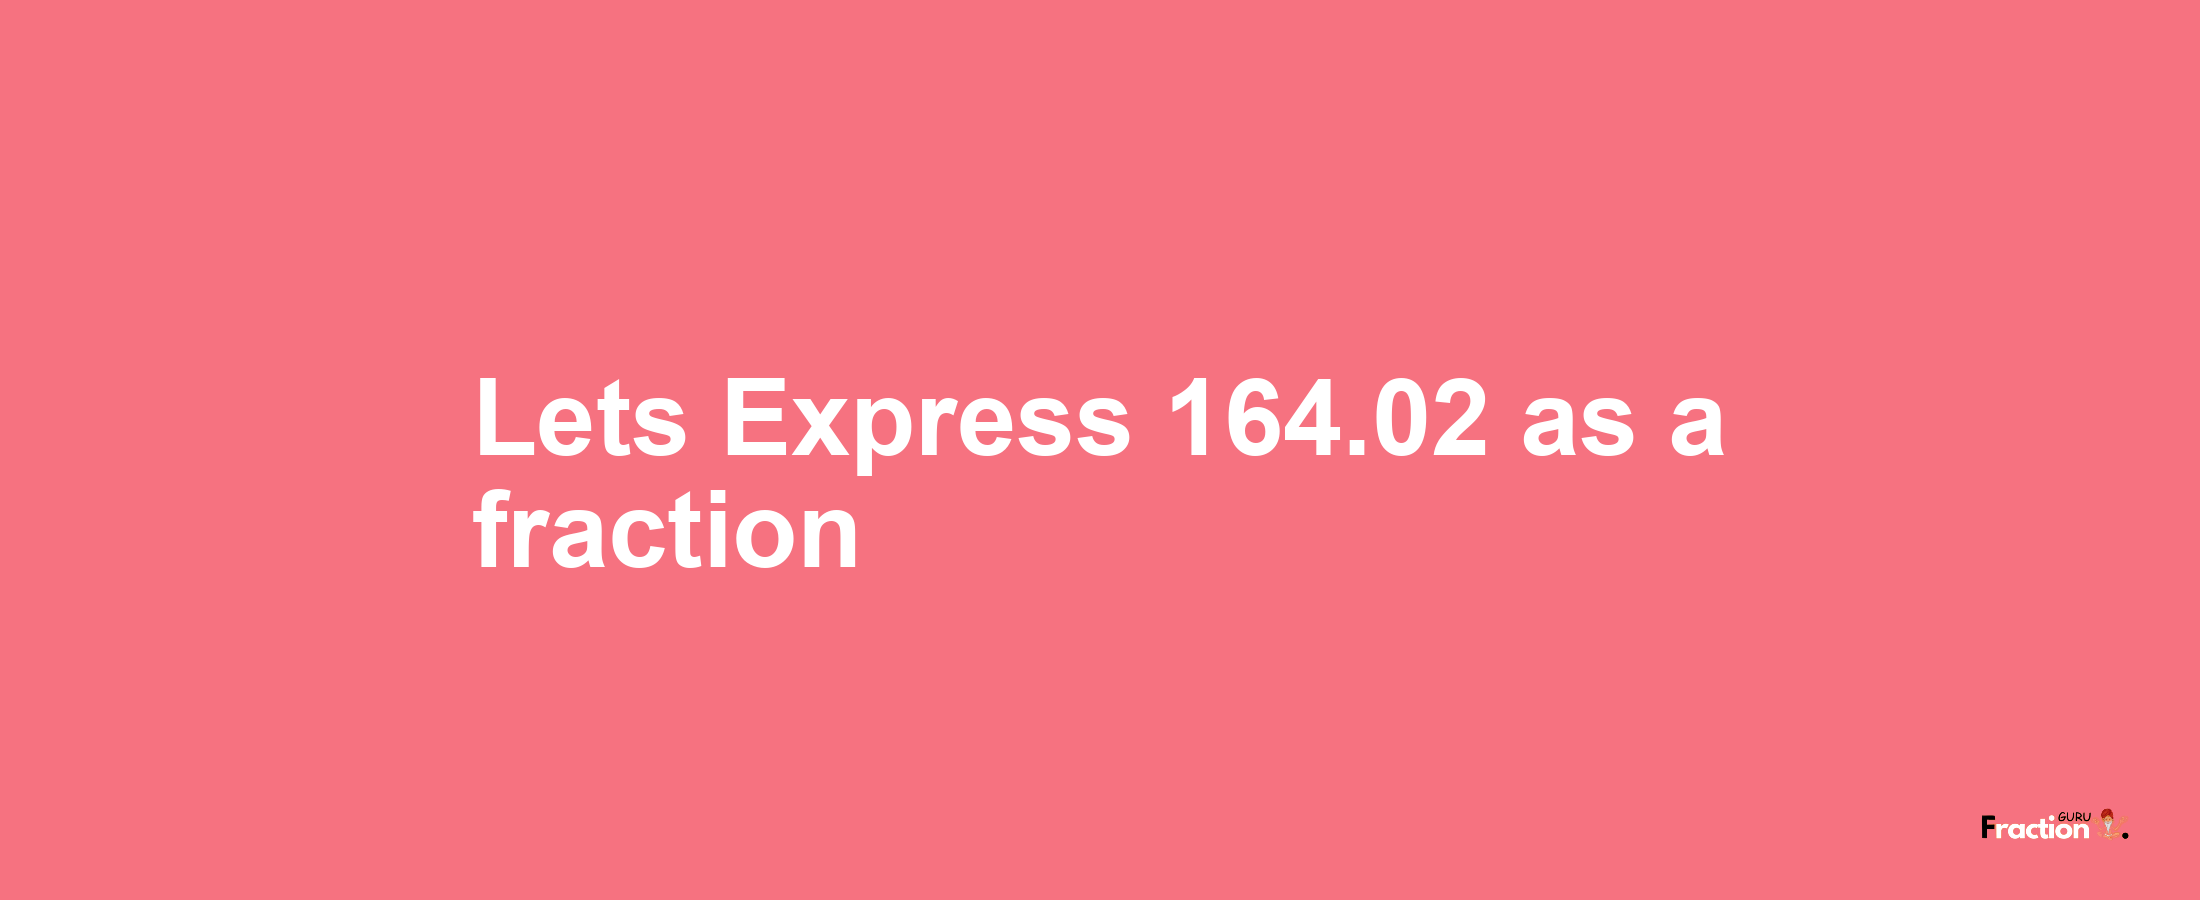 Lets Express 164.02 as afraction